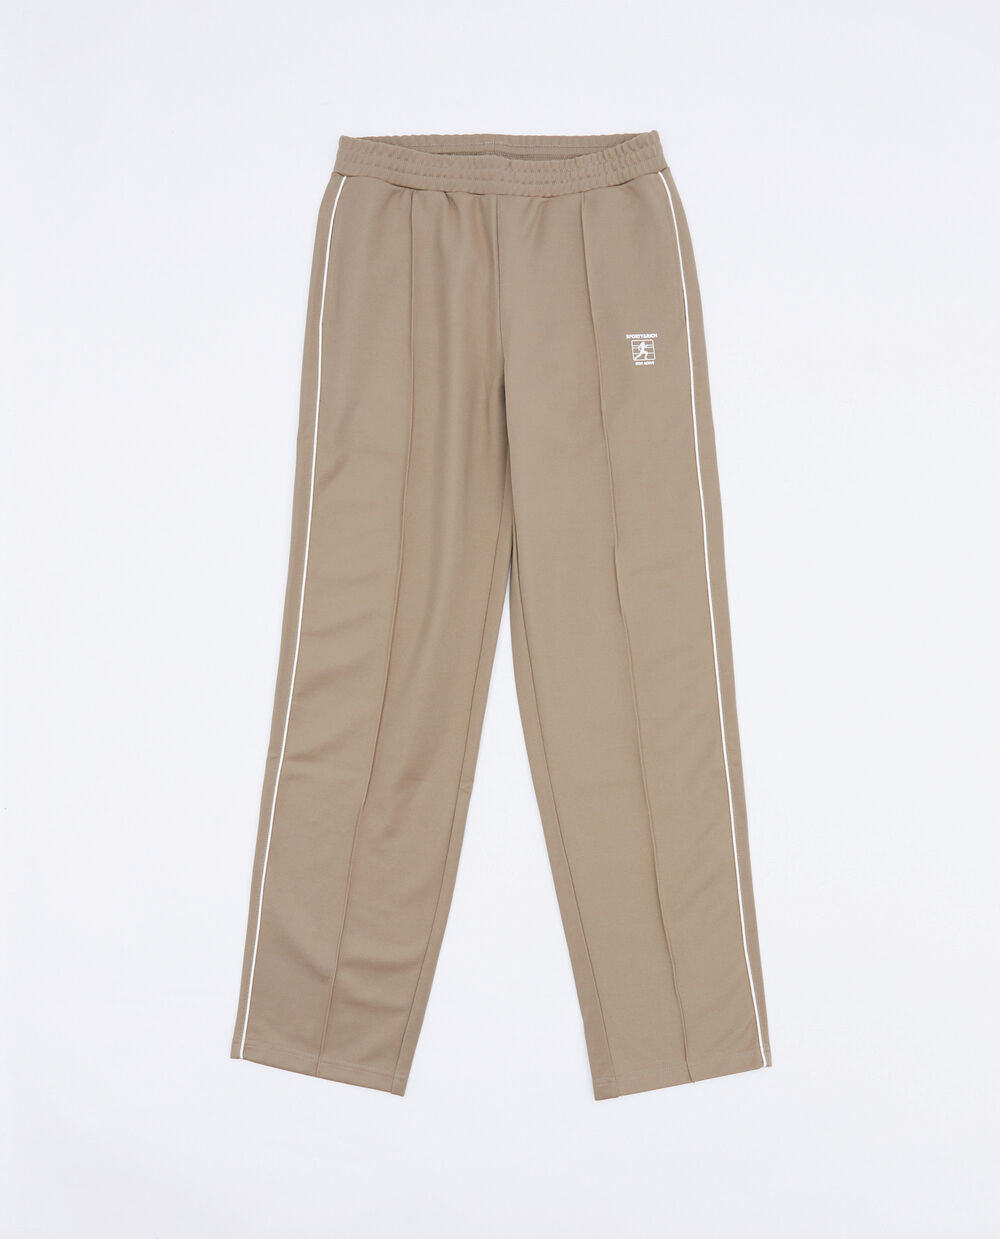 SPORTY & RICH RUNNER TRACK PANTS